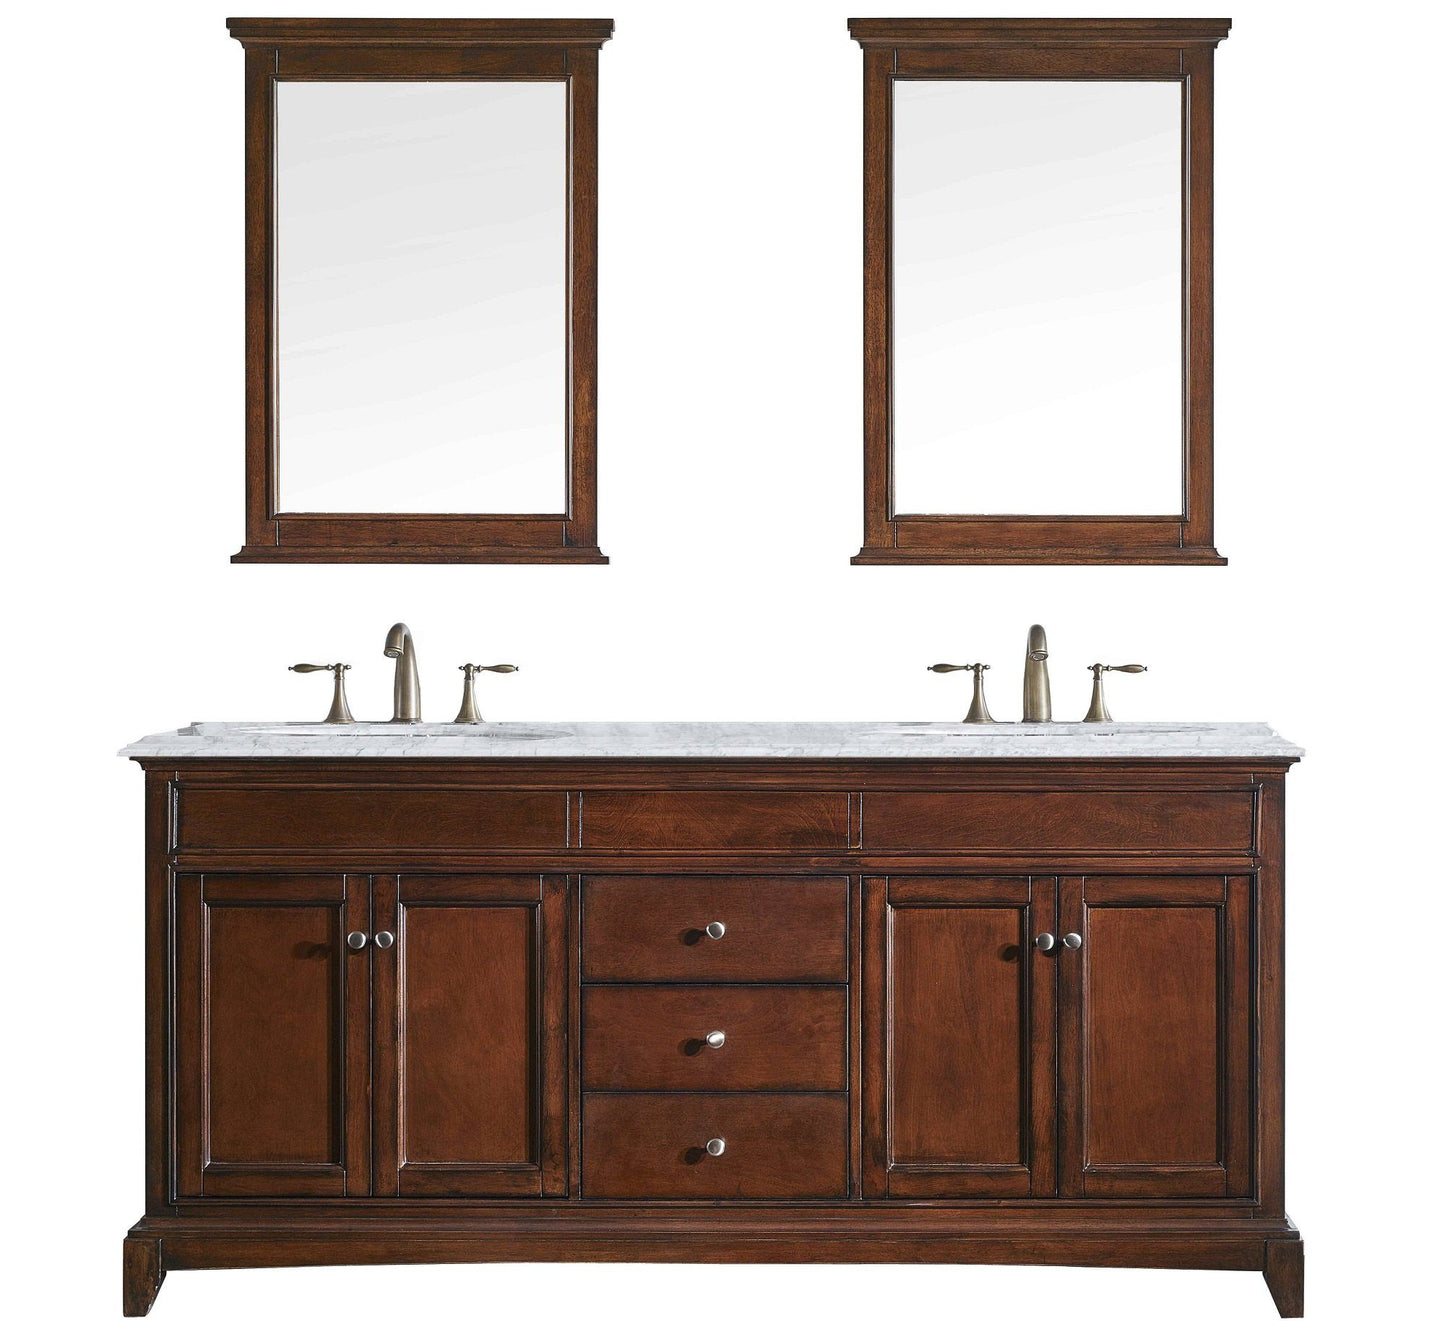 Eviva Elite Stamford 60" Brown Solid Wood Bathroom Vanity Set with Double OG White Carrara Marble Top & White Undermount Porcelain Sink - Luxe Bathroom Vanities Luxury Bathroom Fixtures Bathroom Furniture